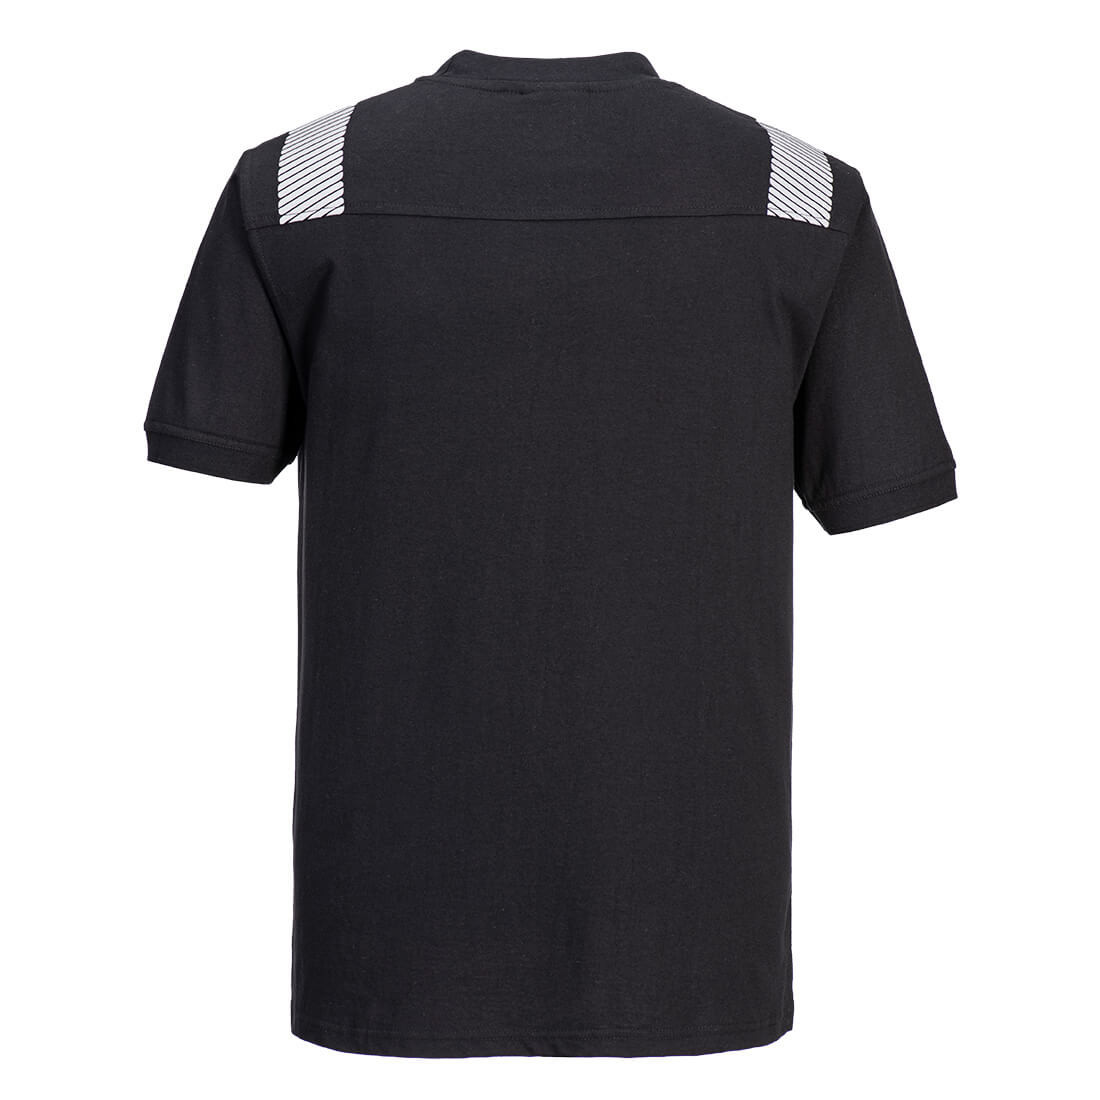 WX3 Flame Resistant T-Shirt - Safetywear